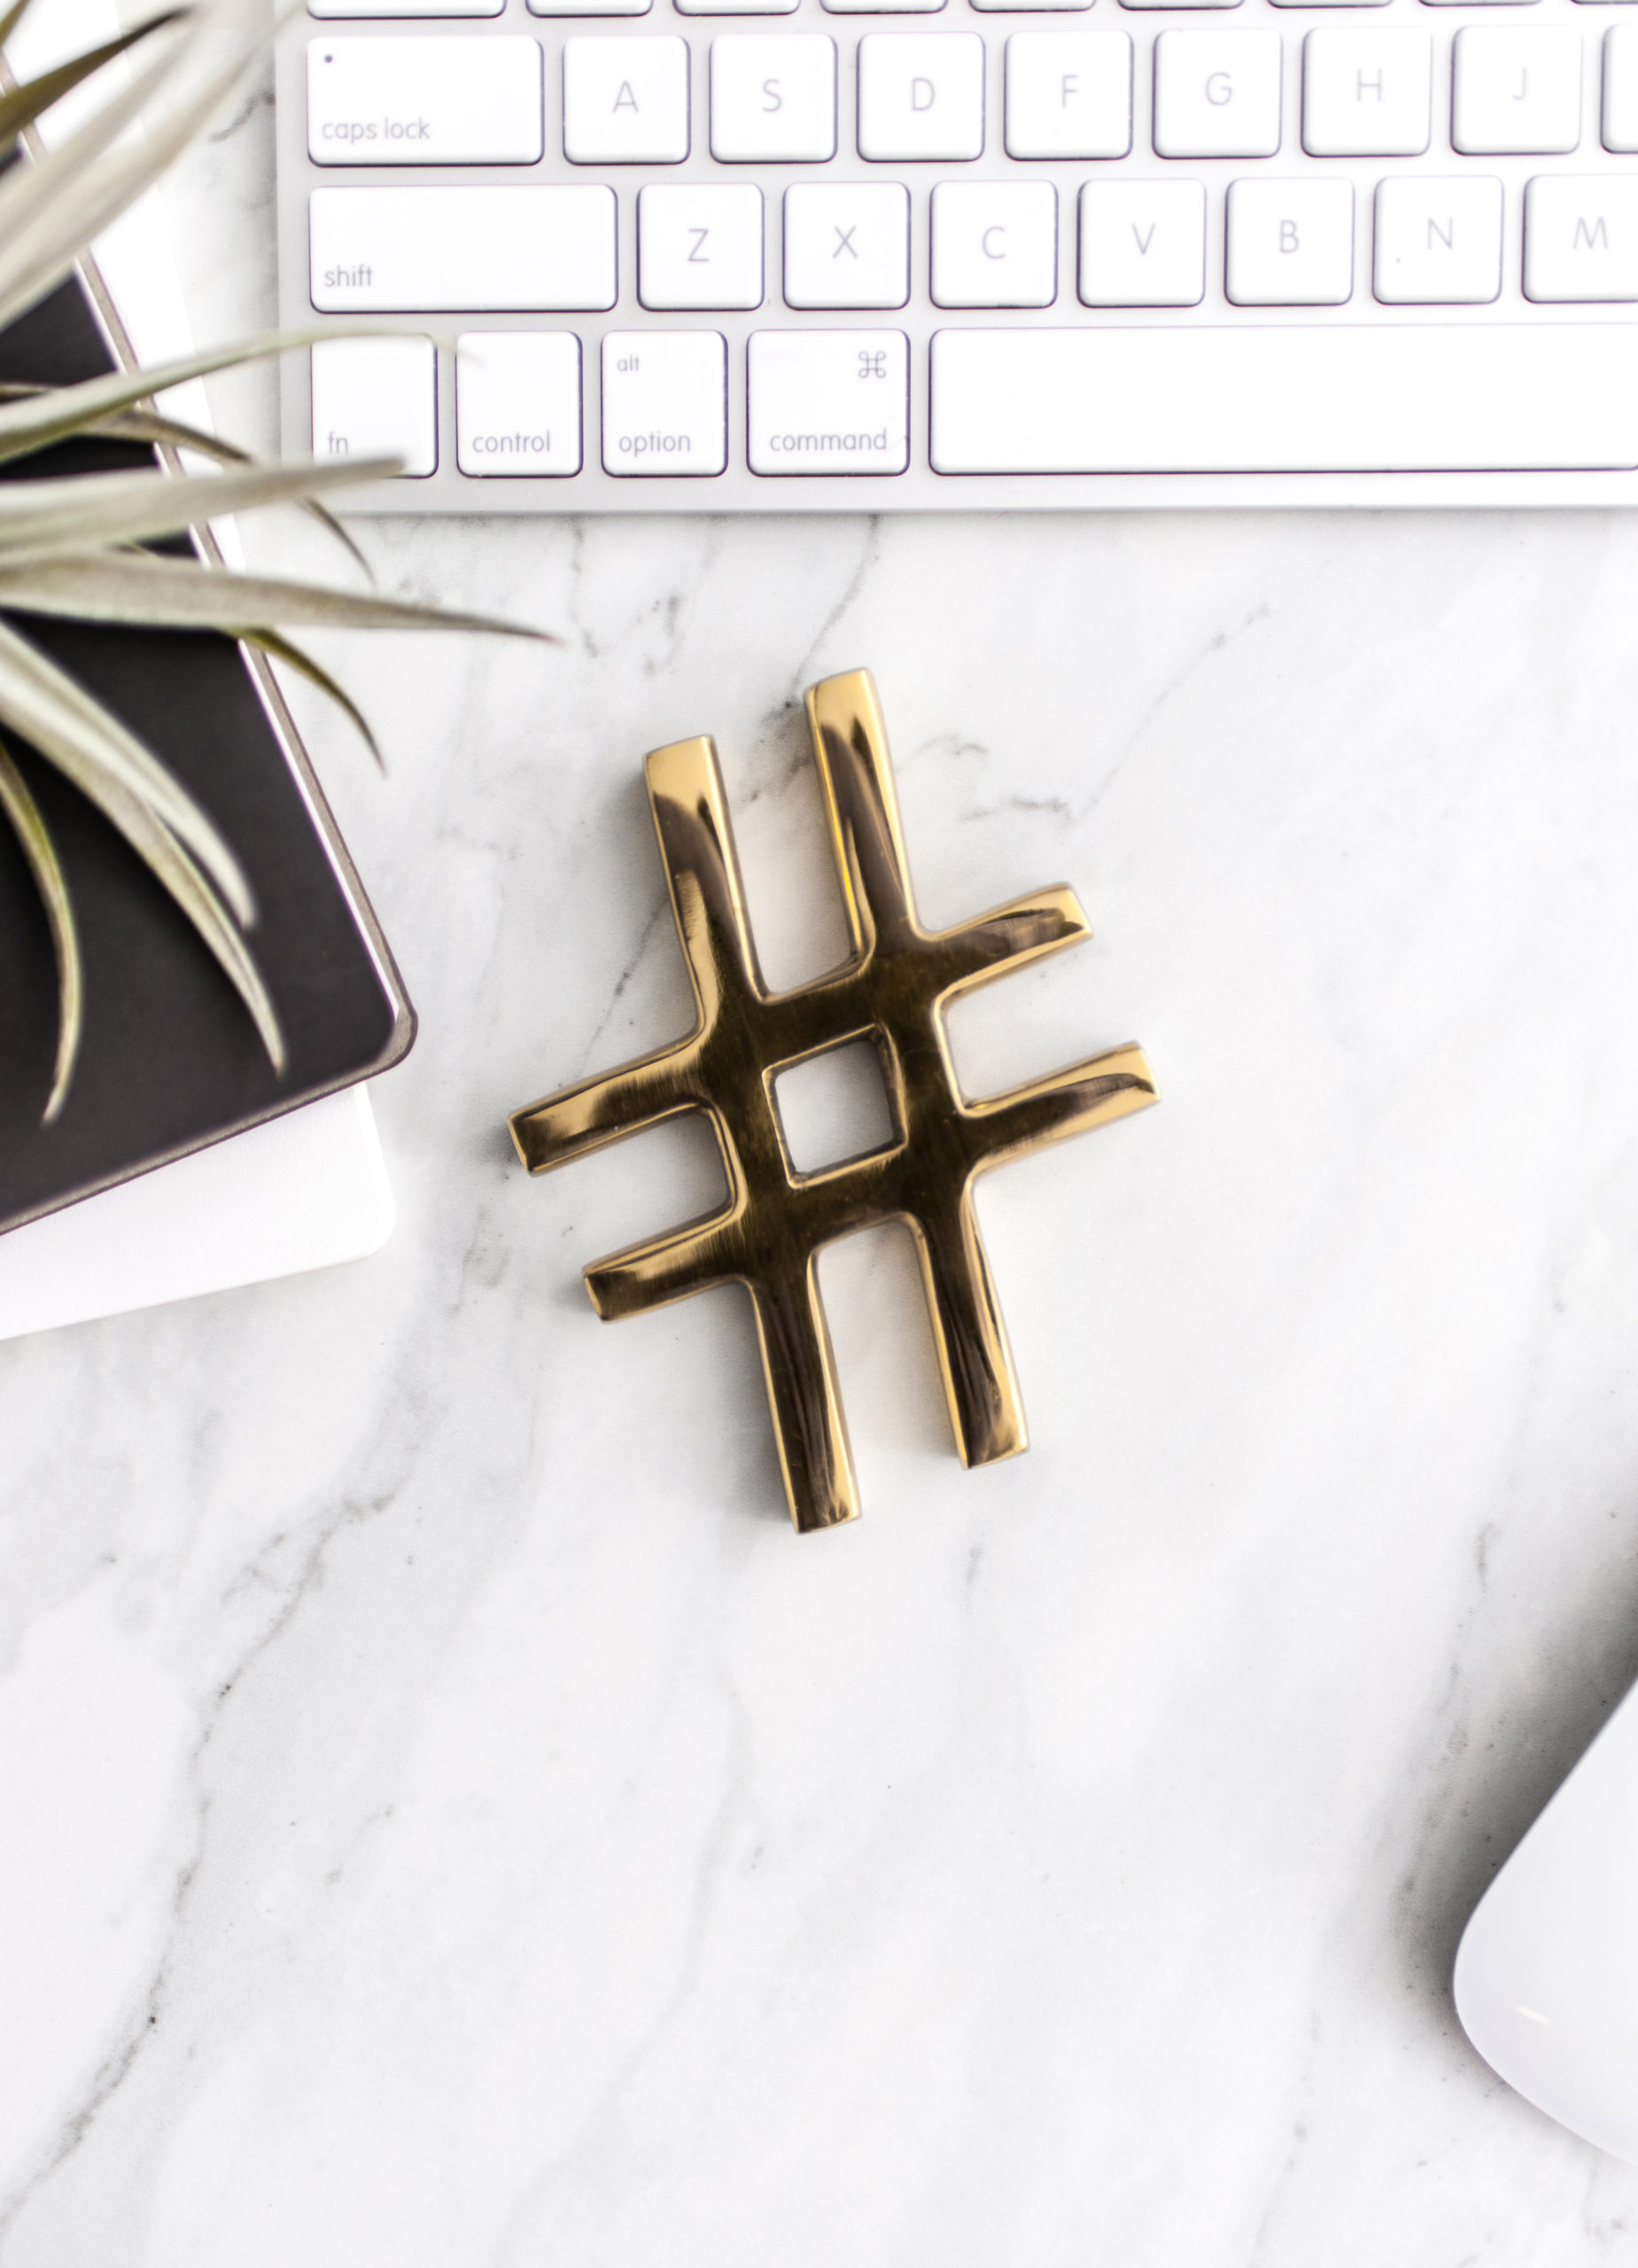 50 Must-Use Hashtags for Creative Entrepreneurs to Boost Your Instagram Engagement | Learn our best tips for using hashtags on Instagram and get our hashtag list for creative entrepreneurs on the South and Palm Blog | South & Palm Brand Studio